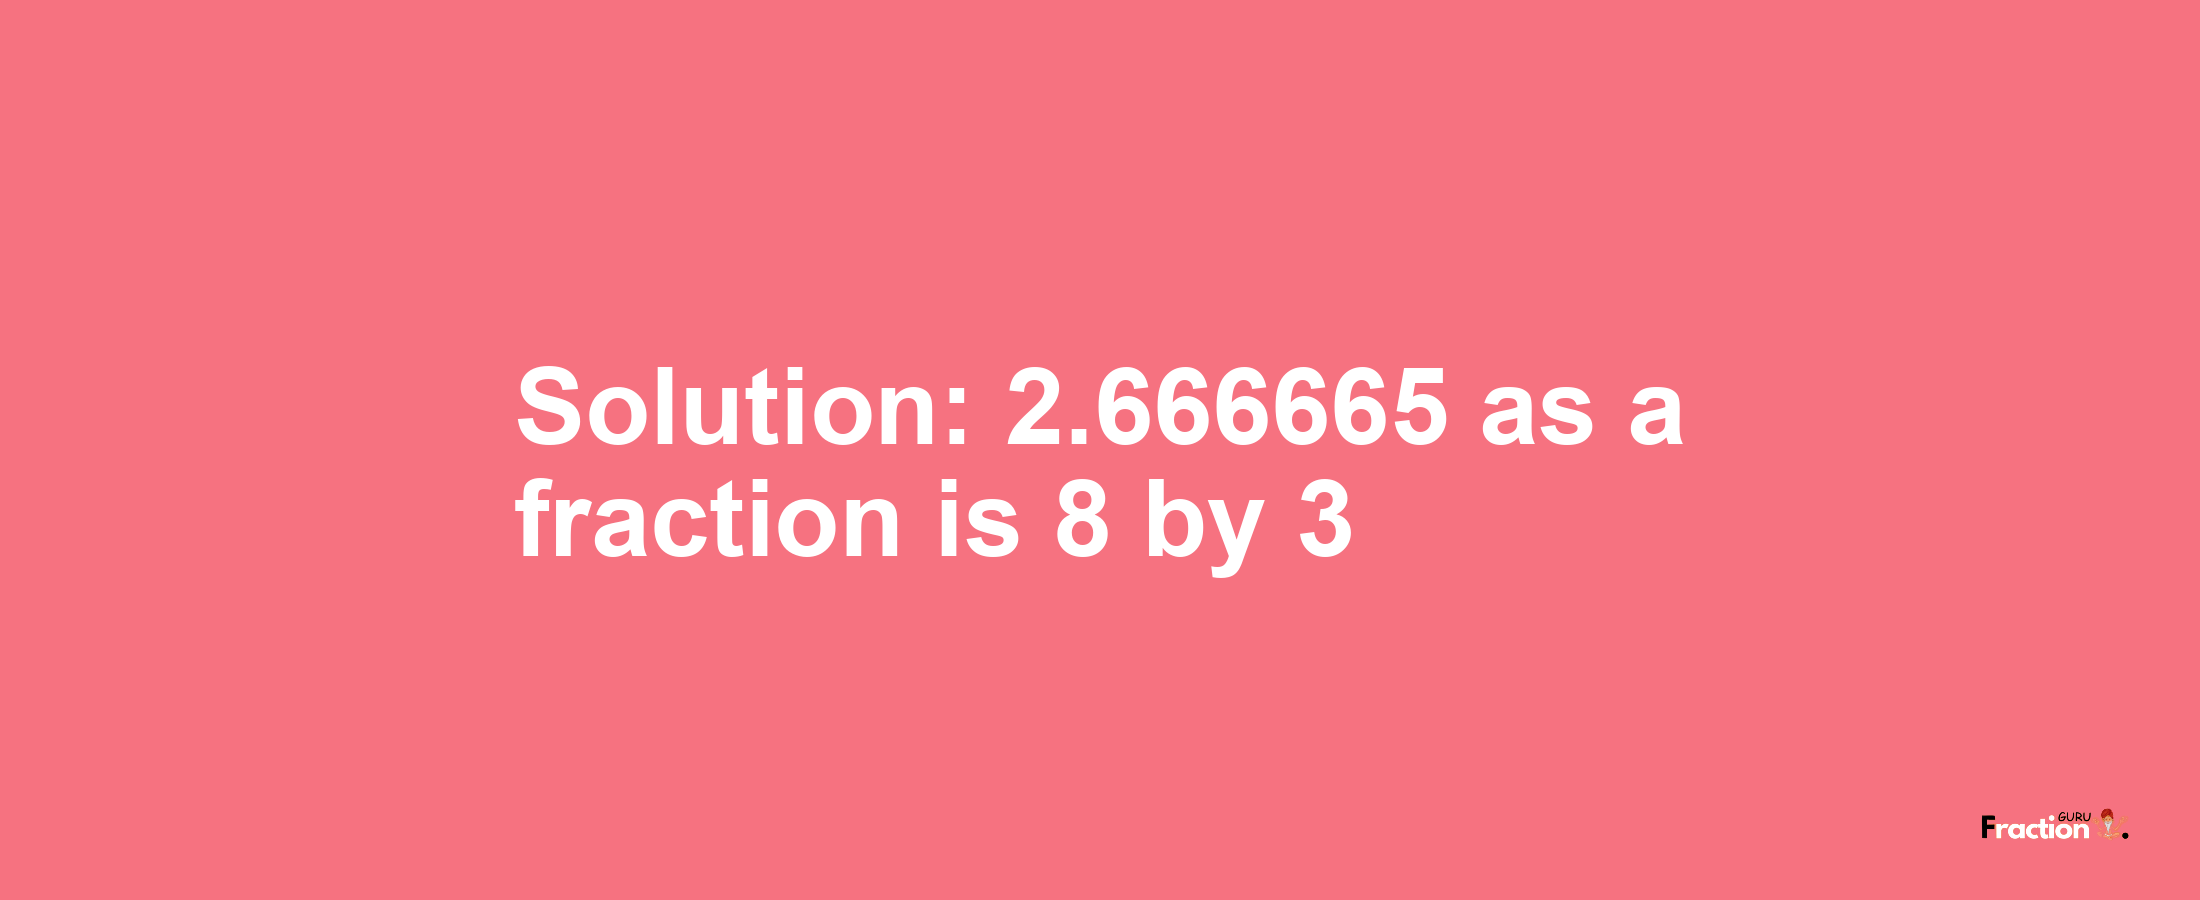 Solution:2.666665 as a fraction is 8/3